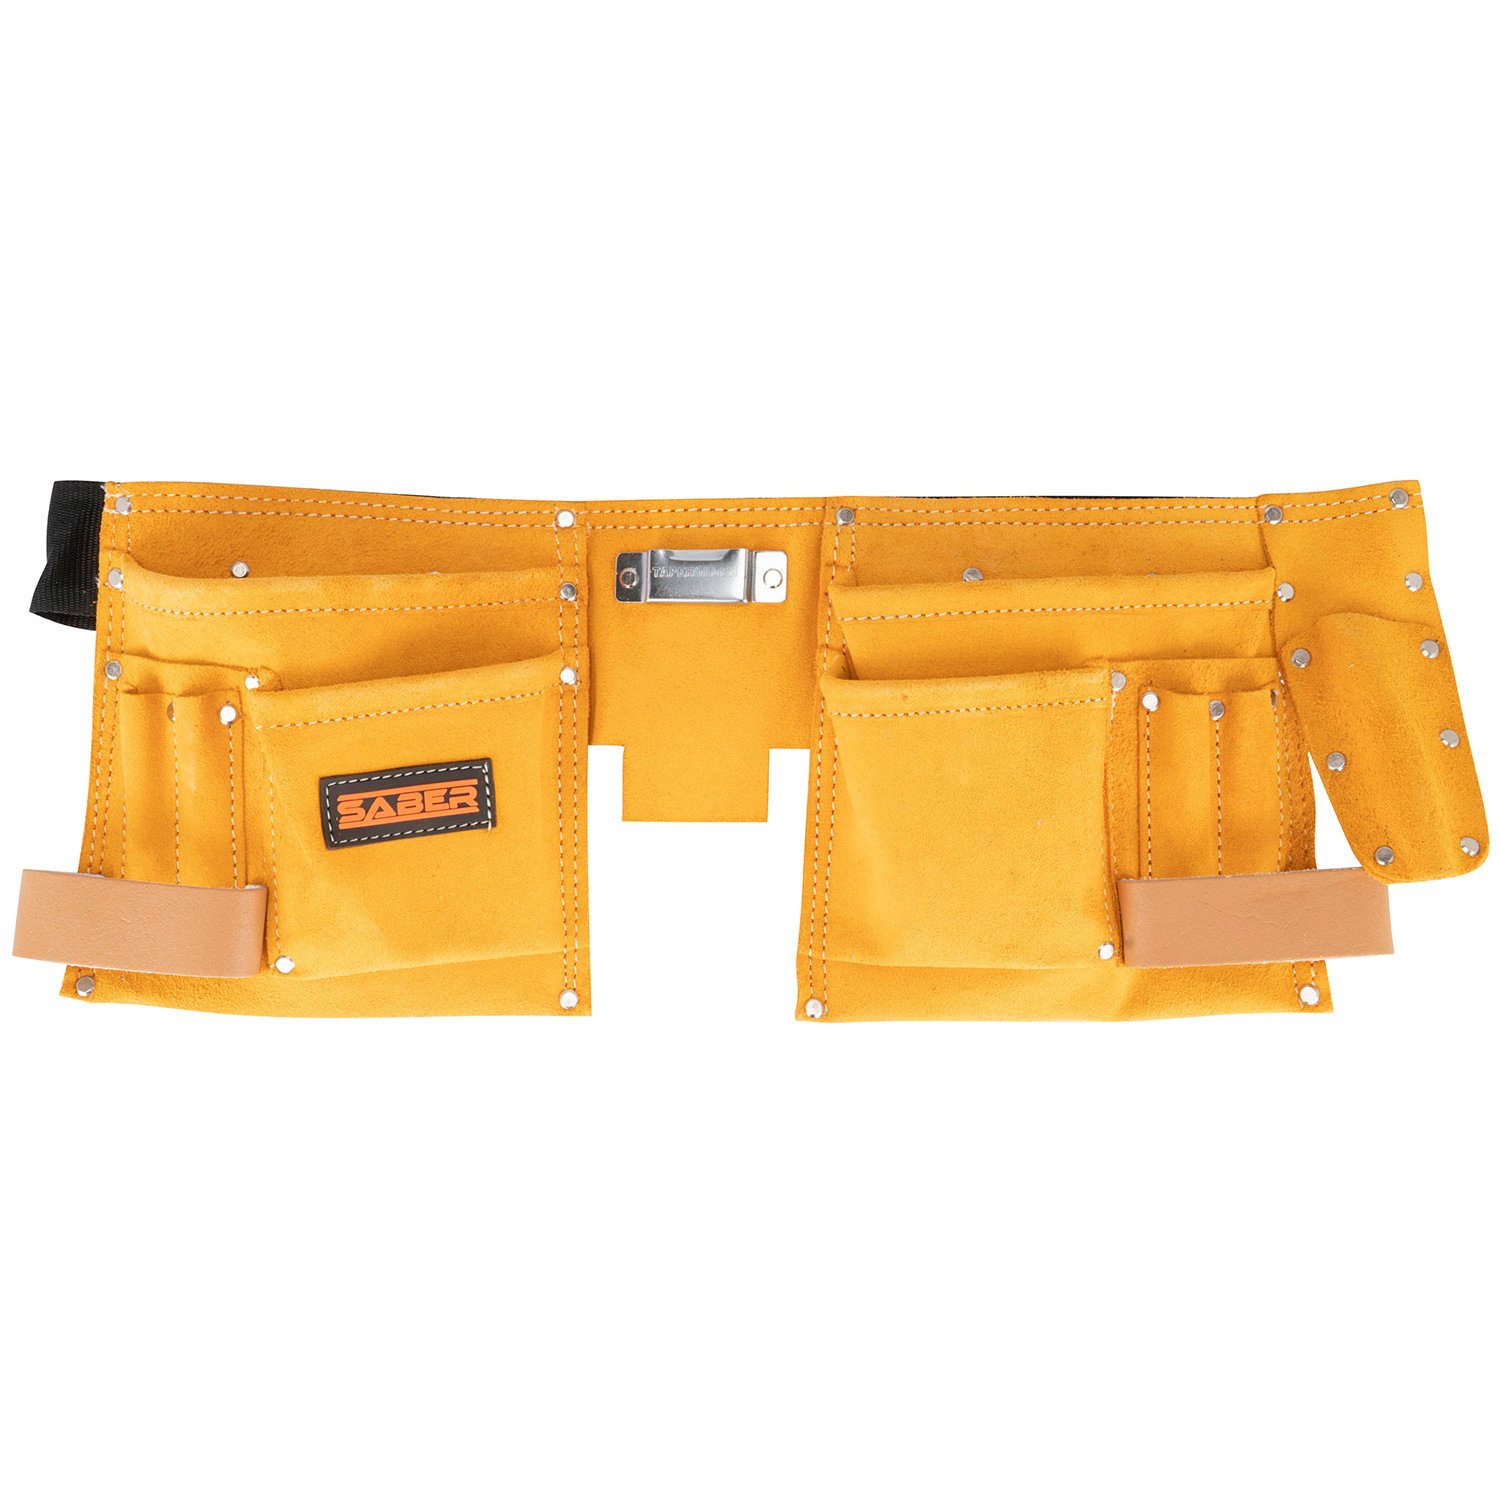 Saber Yellow Double Leather Tool Pouch Image